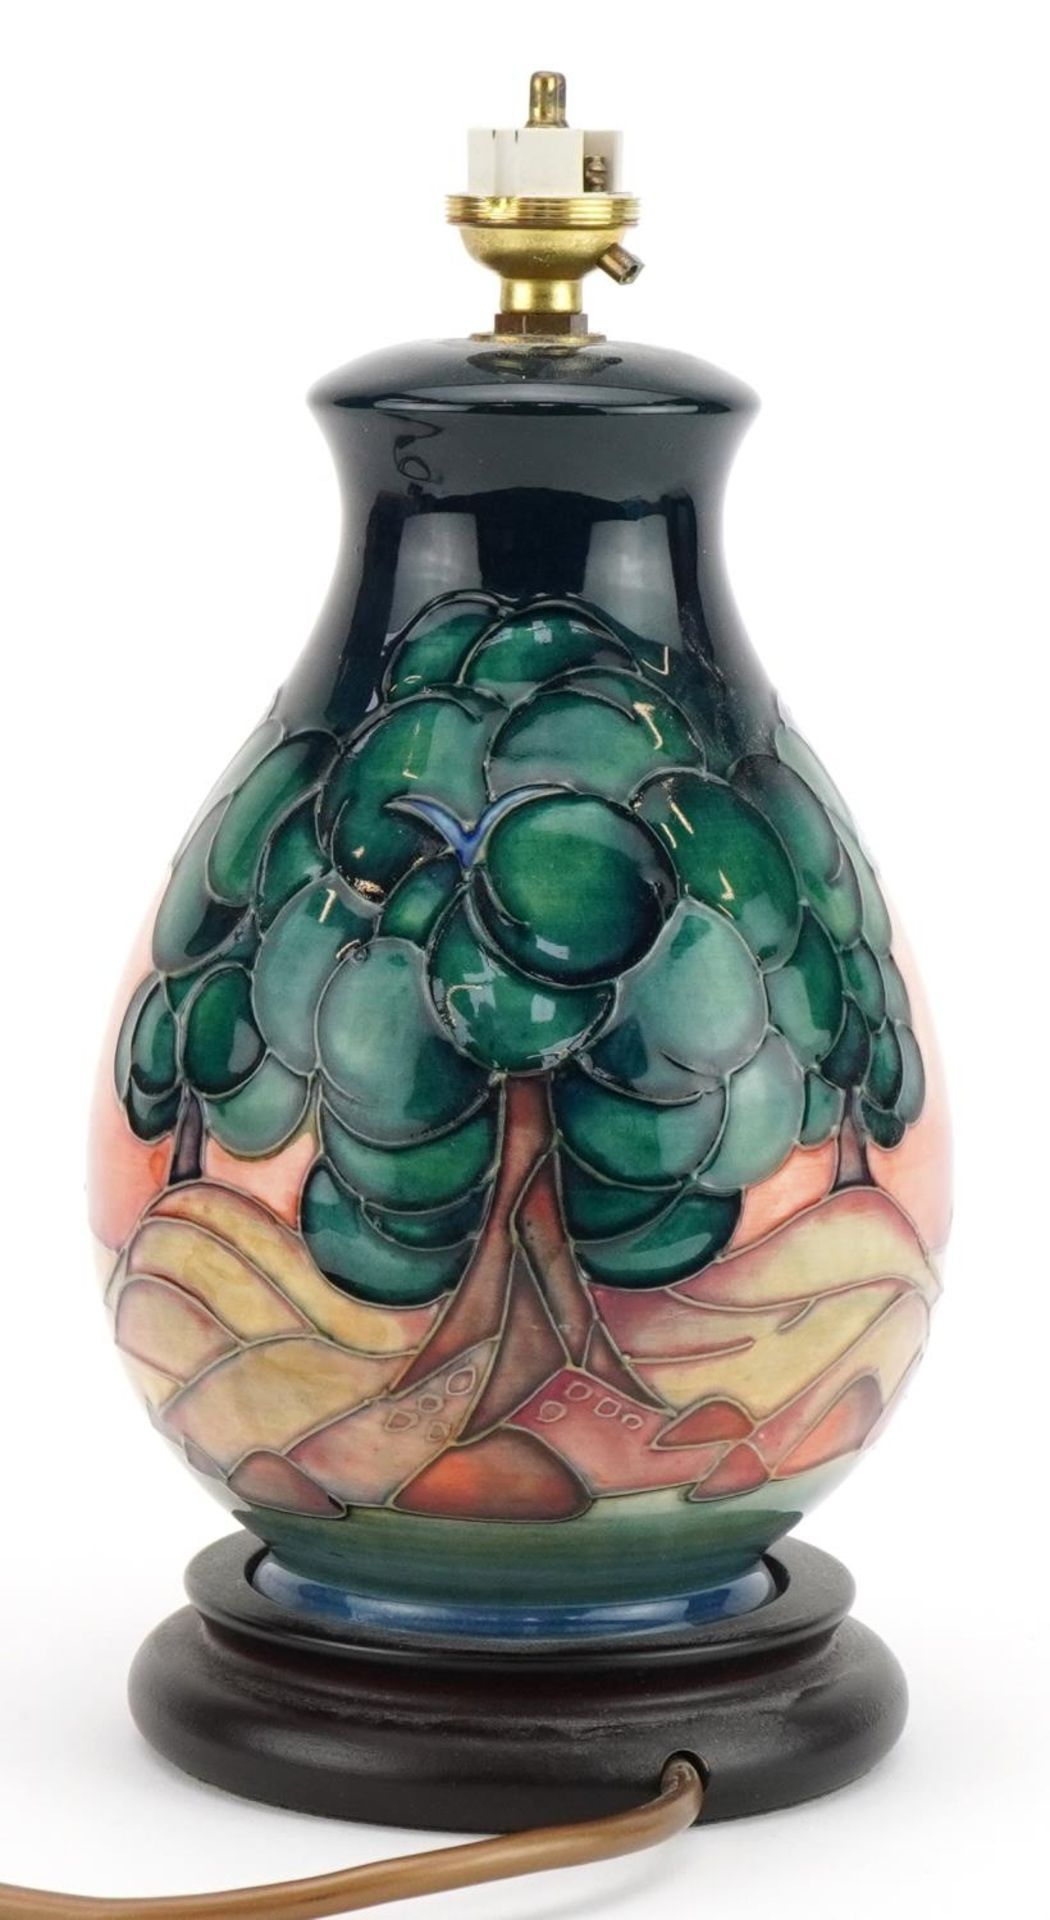 Moorcroft pottery baluster table lamp hand painted in the Mamoura pattern, 26.5cm high - Image 3 of 6